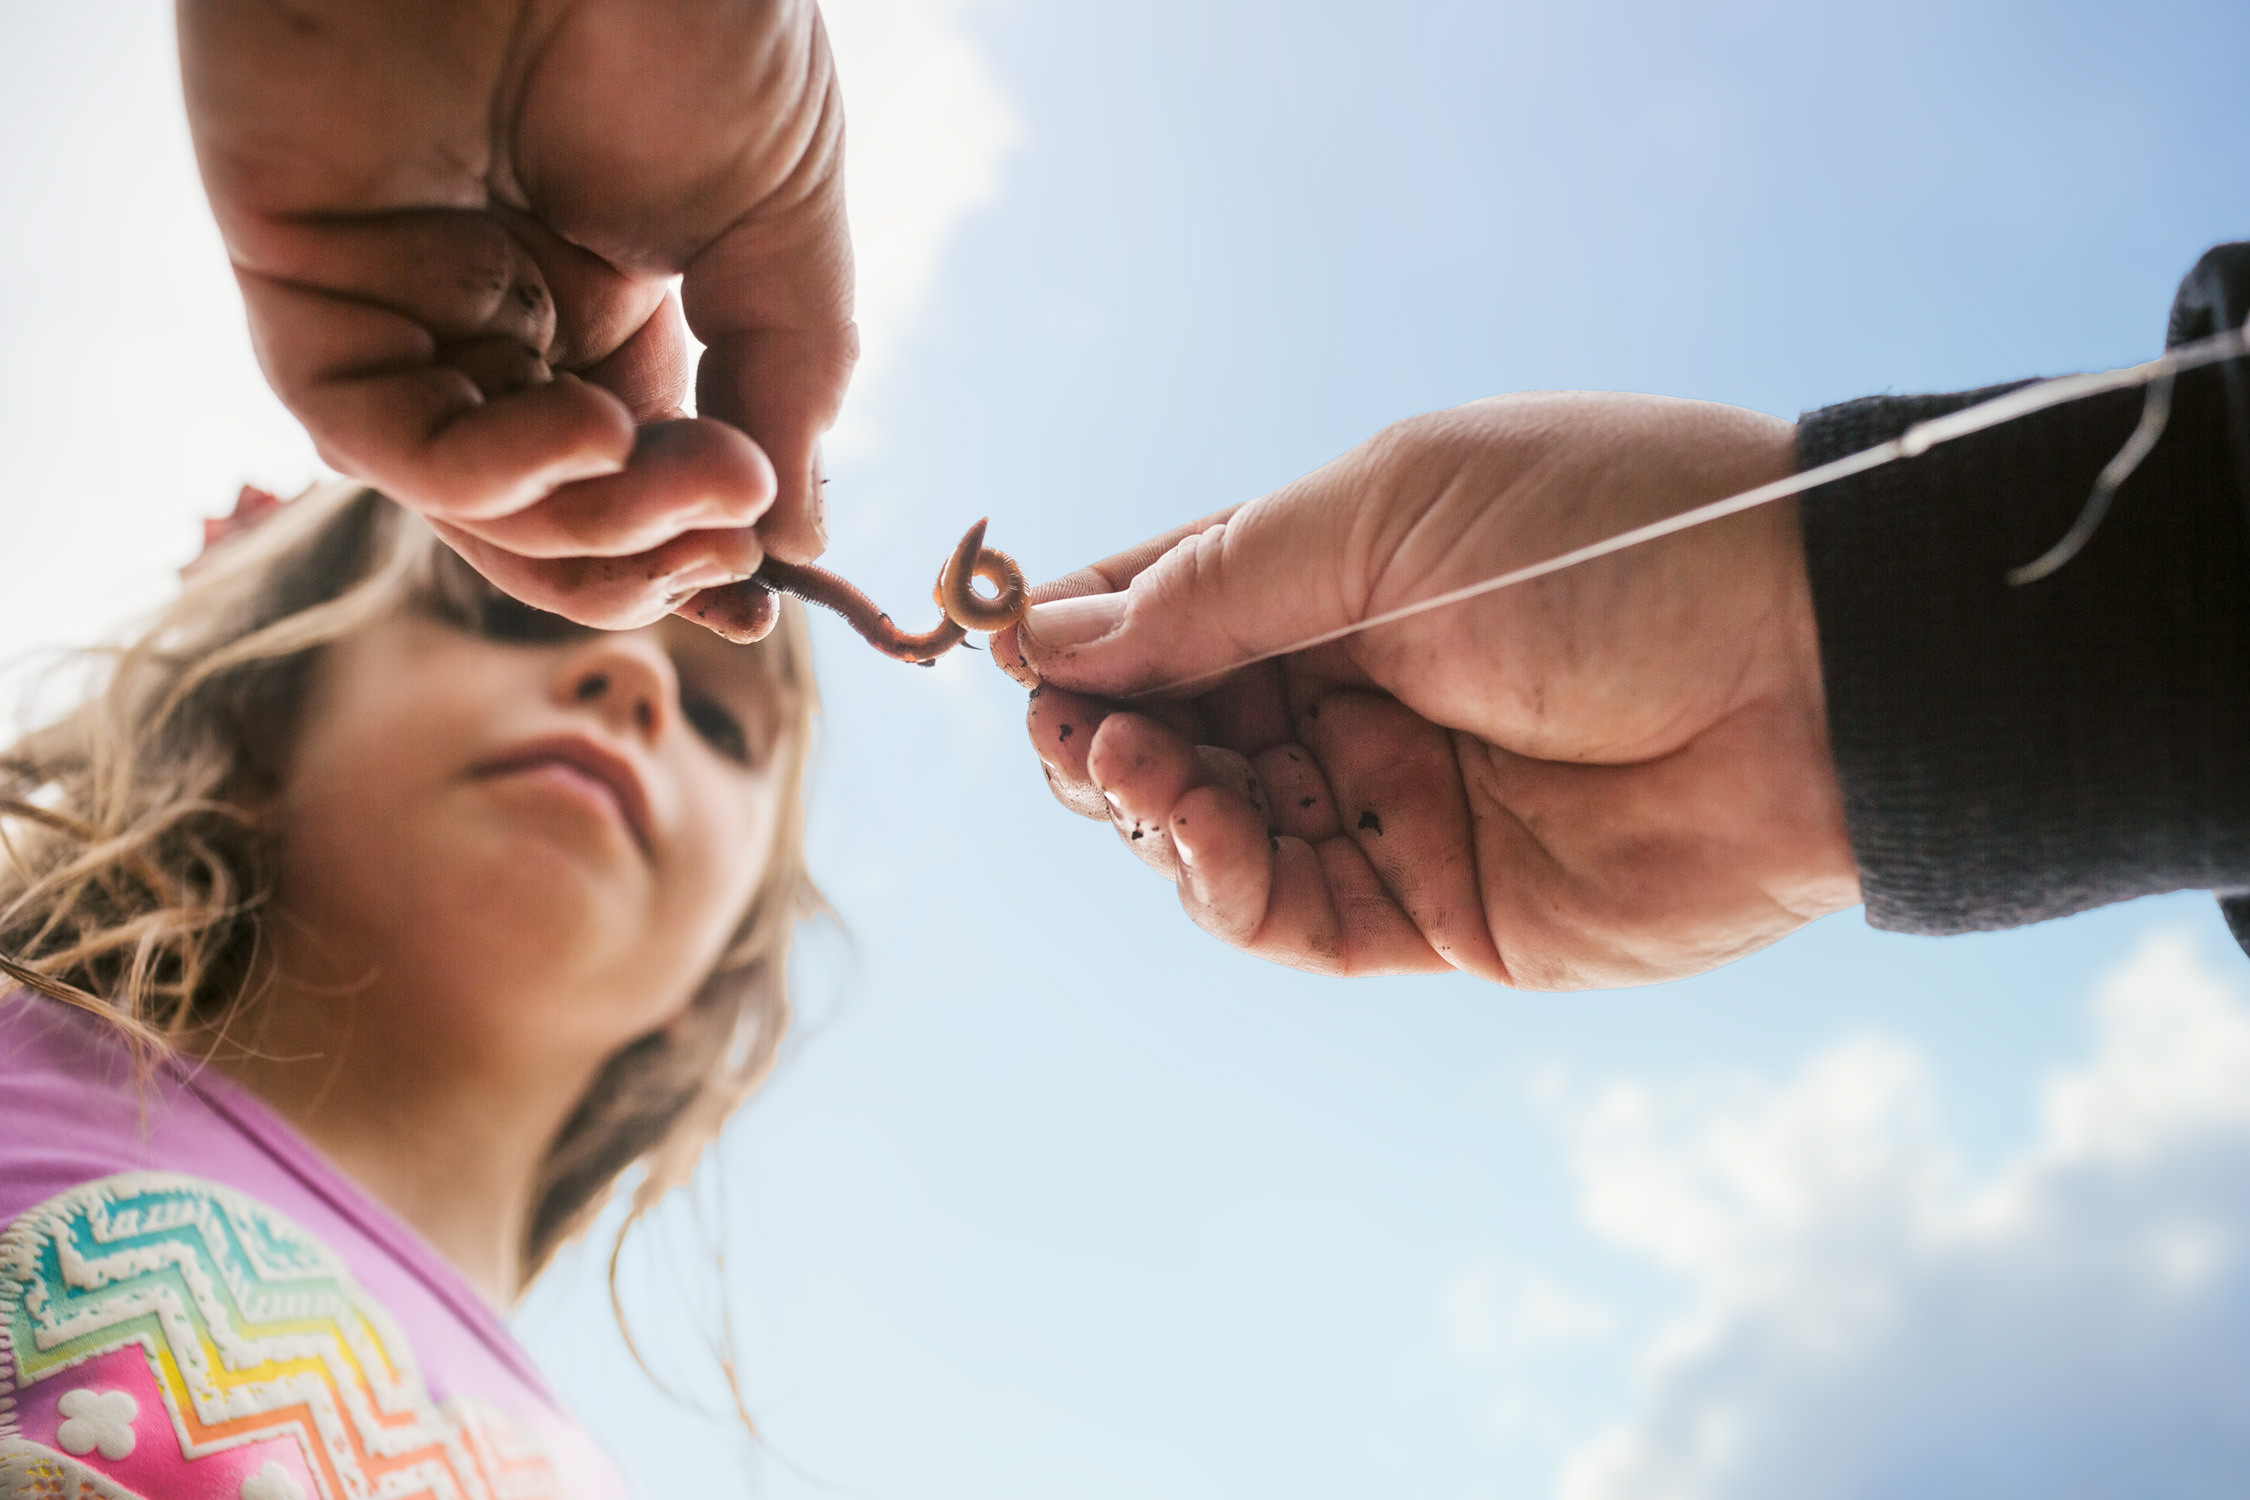 hands hooking worm under sky with girl, washington dc commercial photography